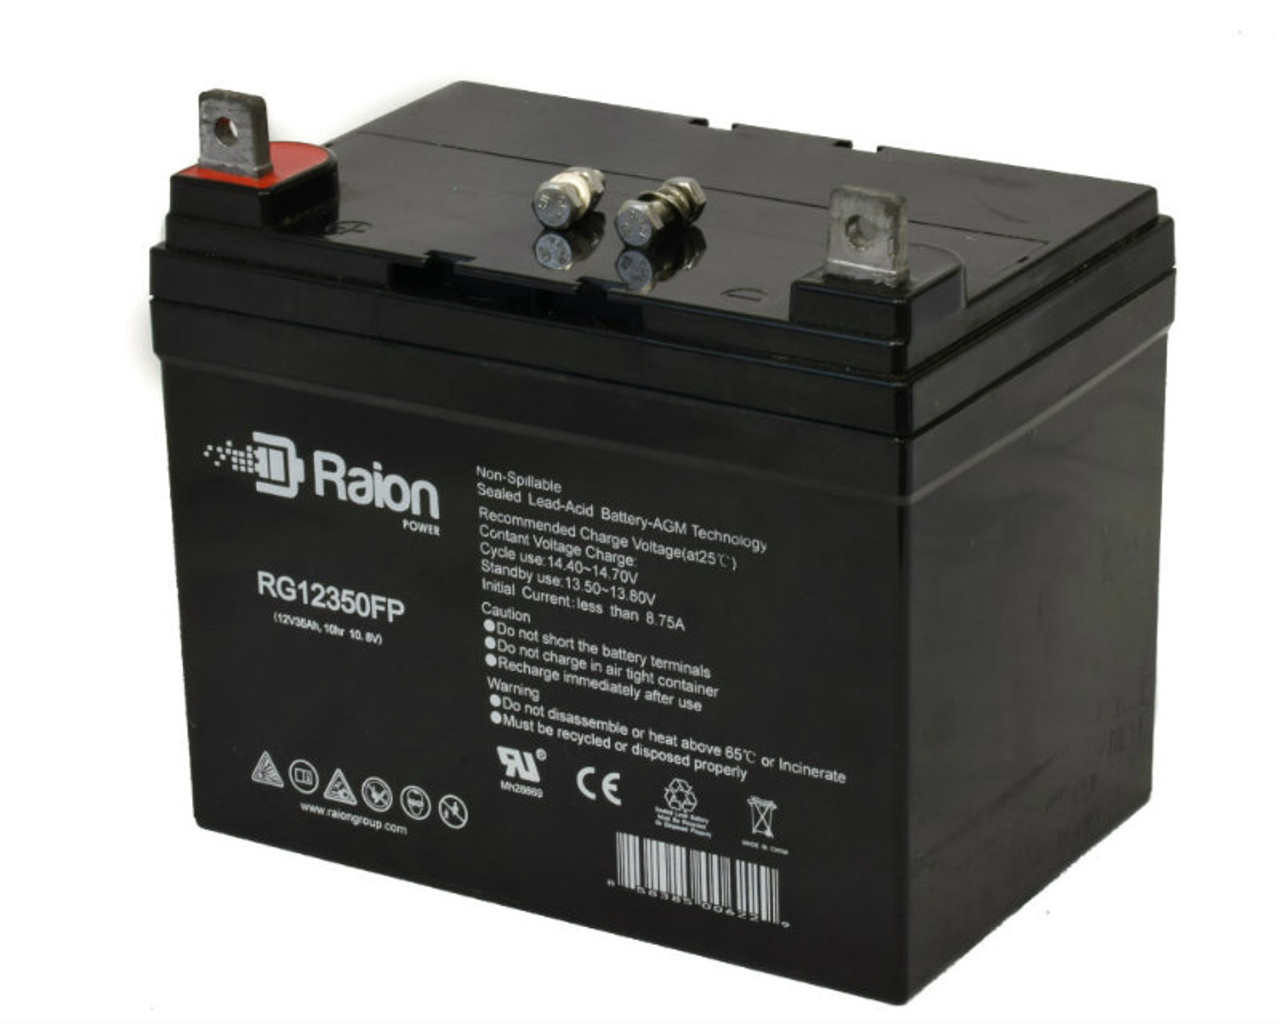 Raion Power Replacement 12V 35Ah RG12350FP Mobility Scooter Battery for Everest & Jennings Quest